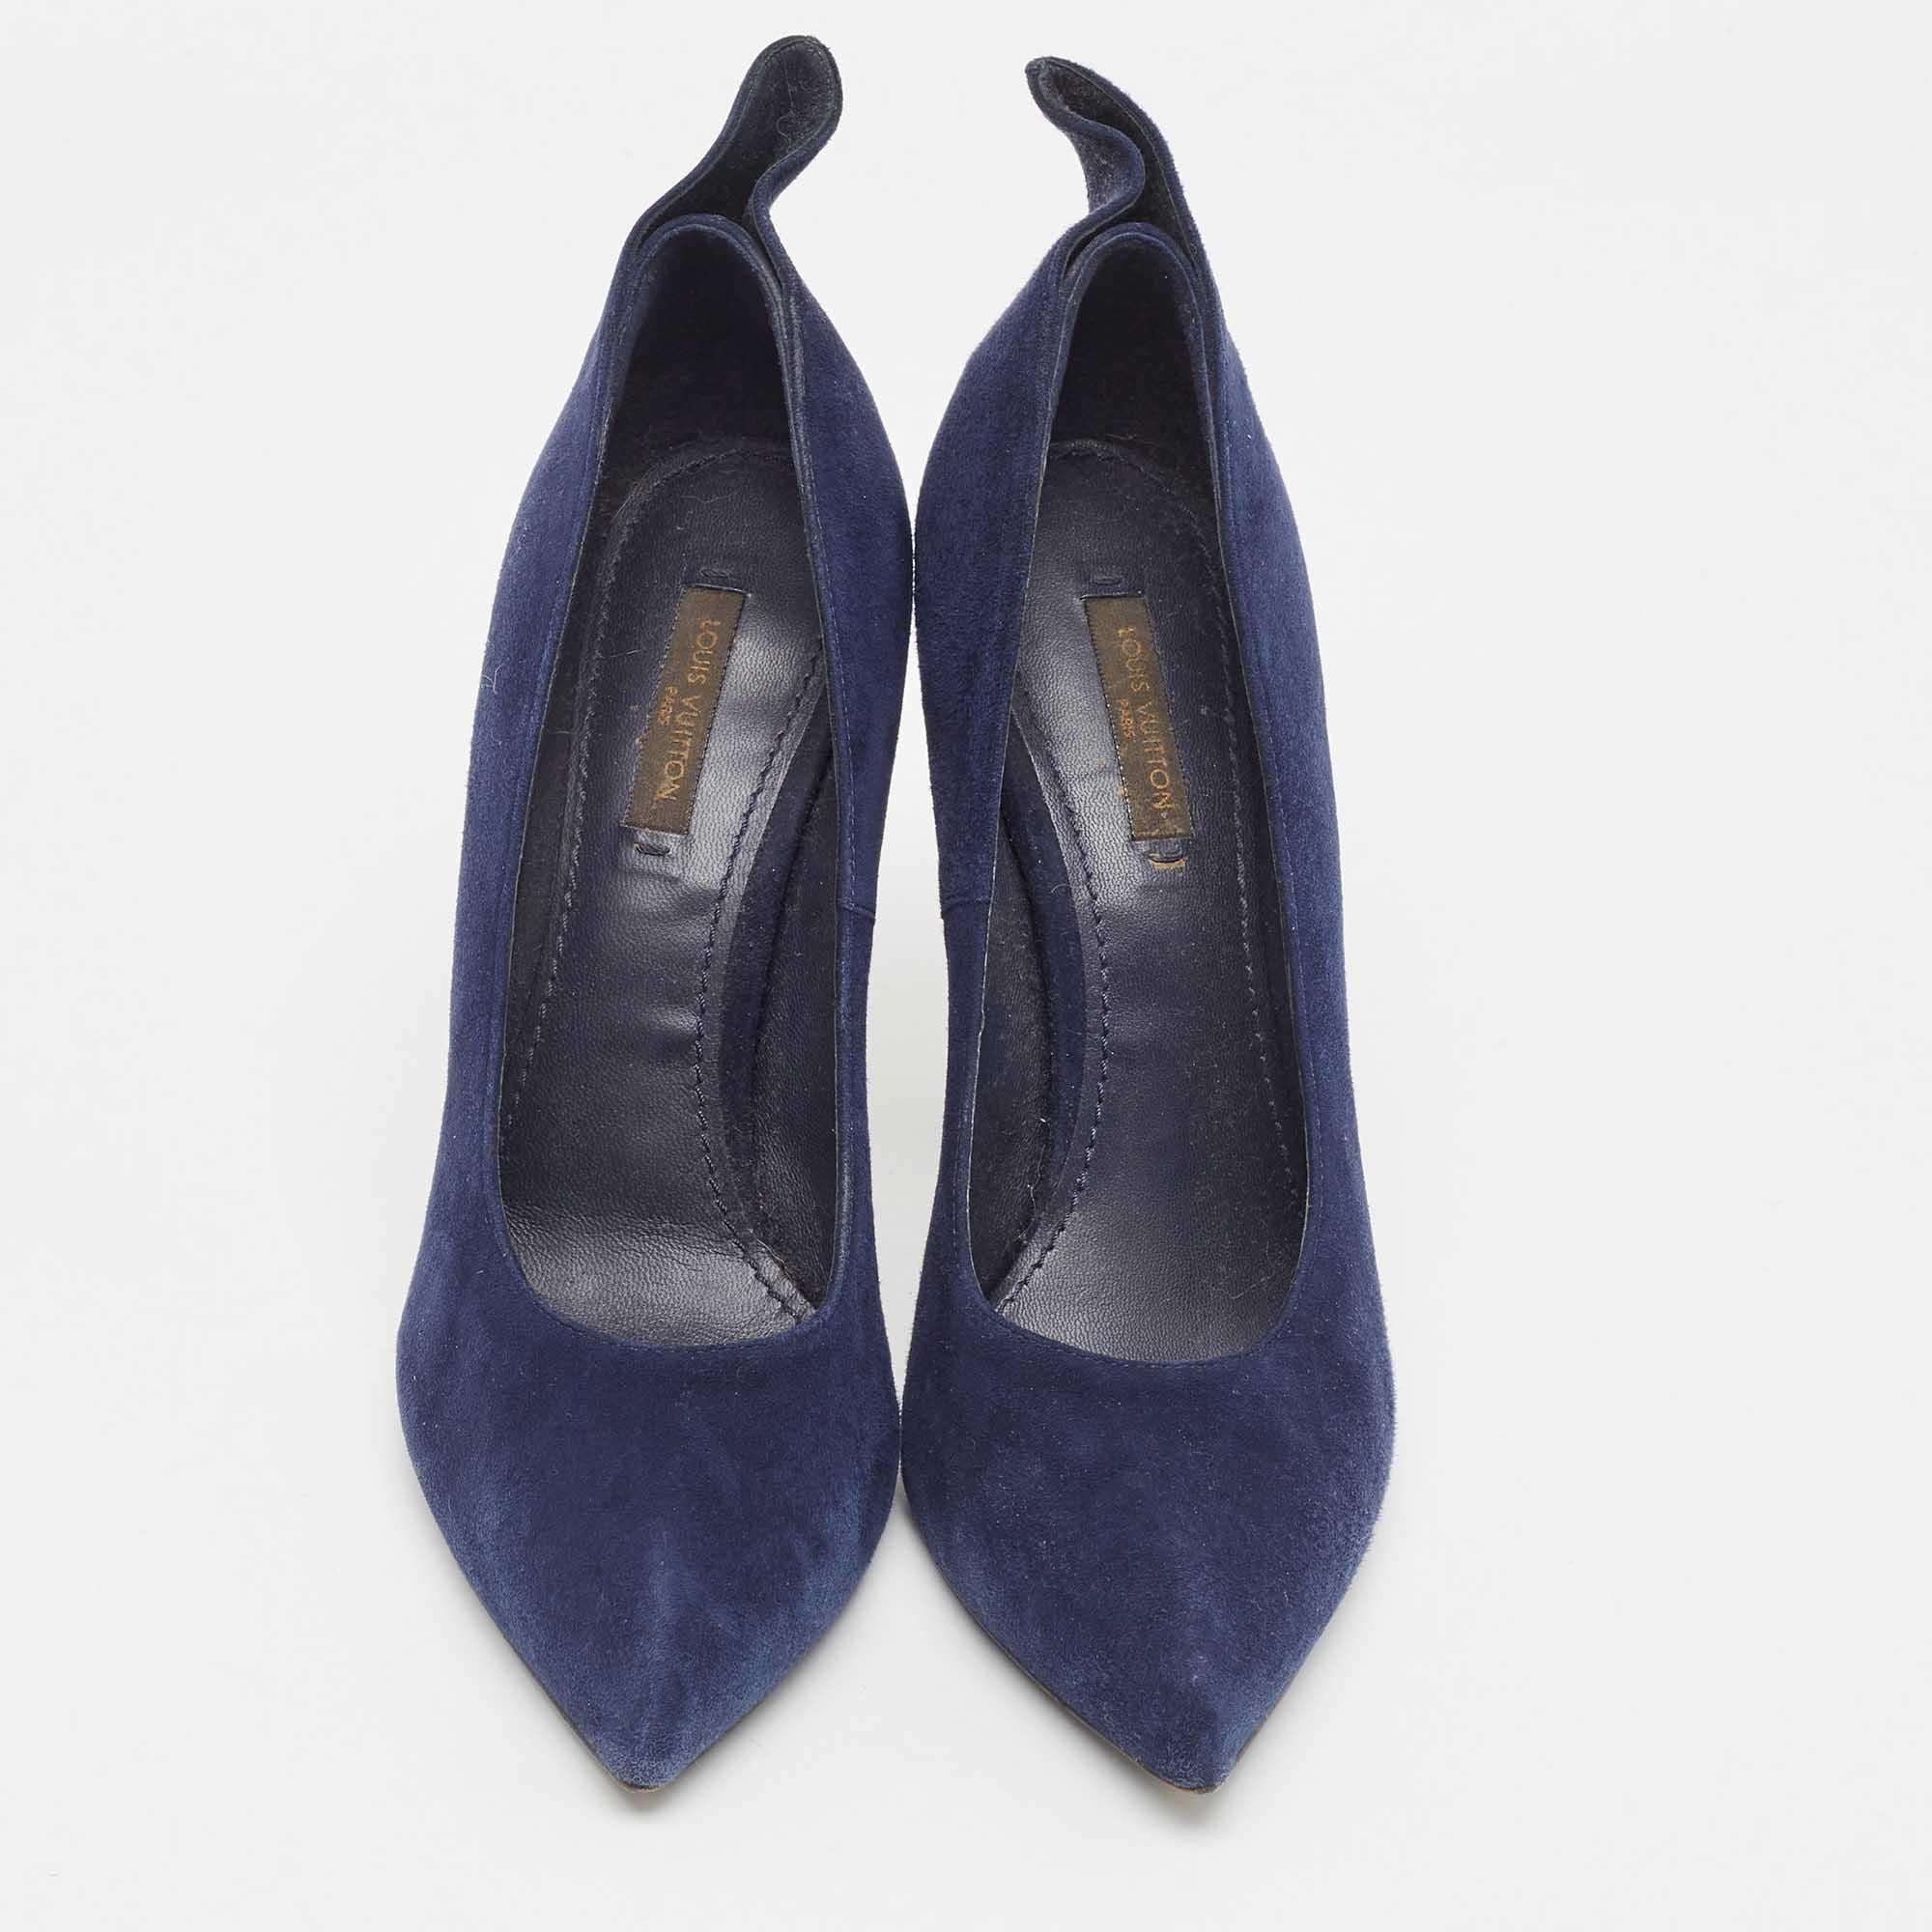 Wonderfully crafted shoes added with notable elements to fit well and pair perfectly with all your plans. Make these LV navy blue pumps yours today!

Includes
Original Dustbag